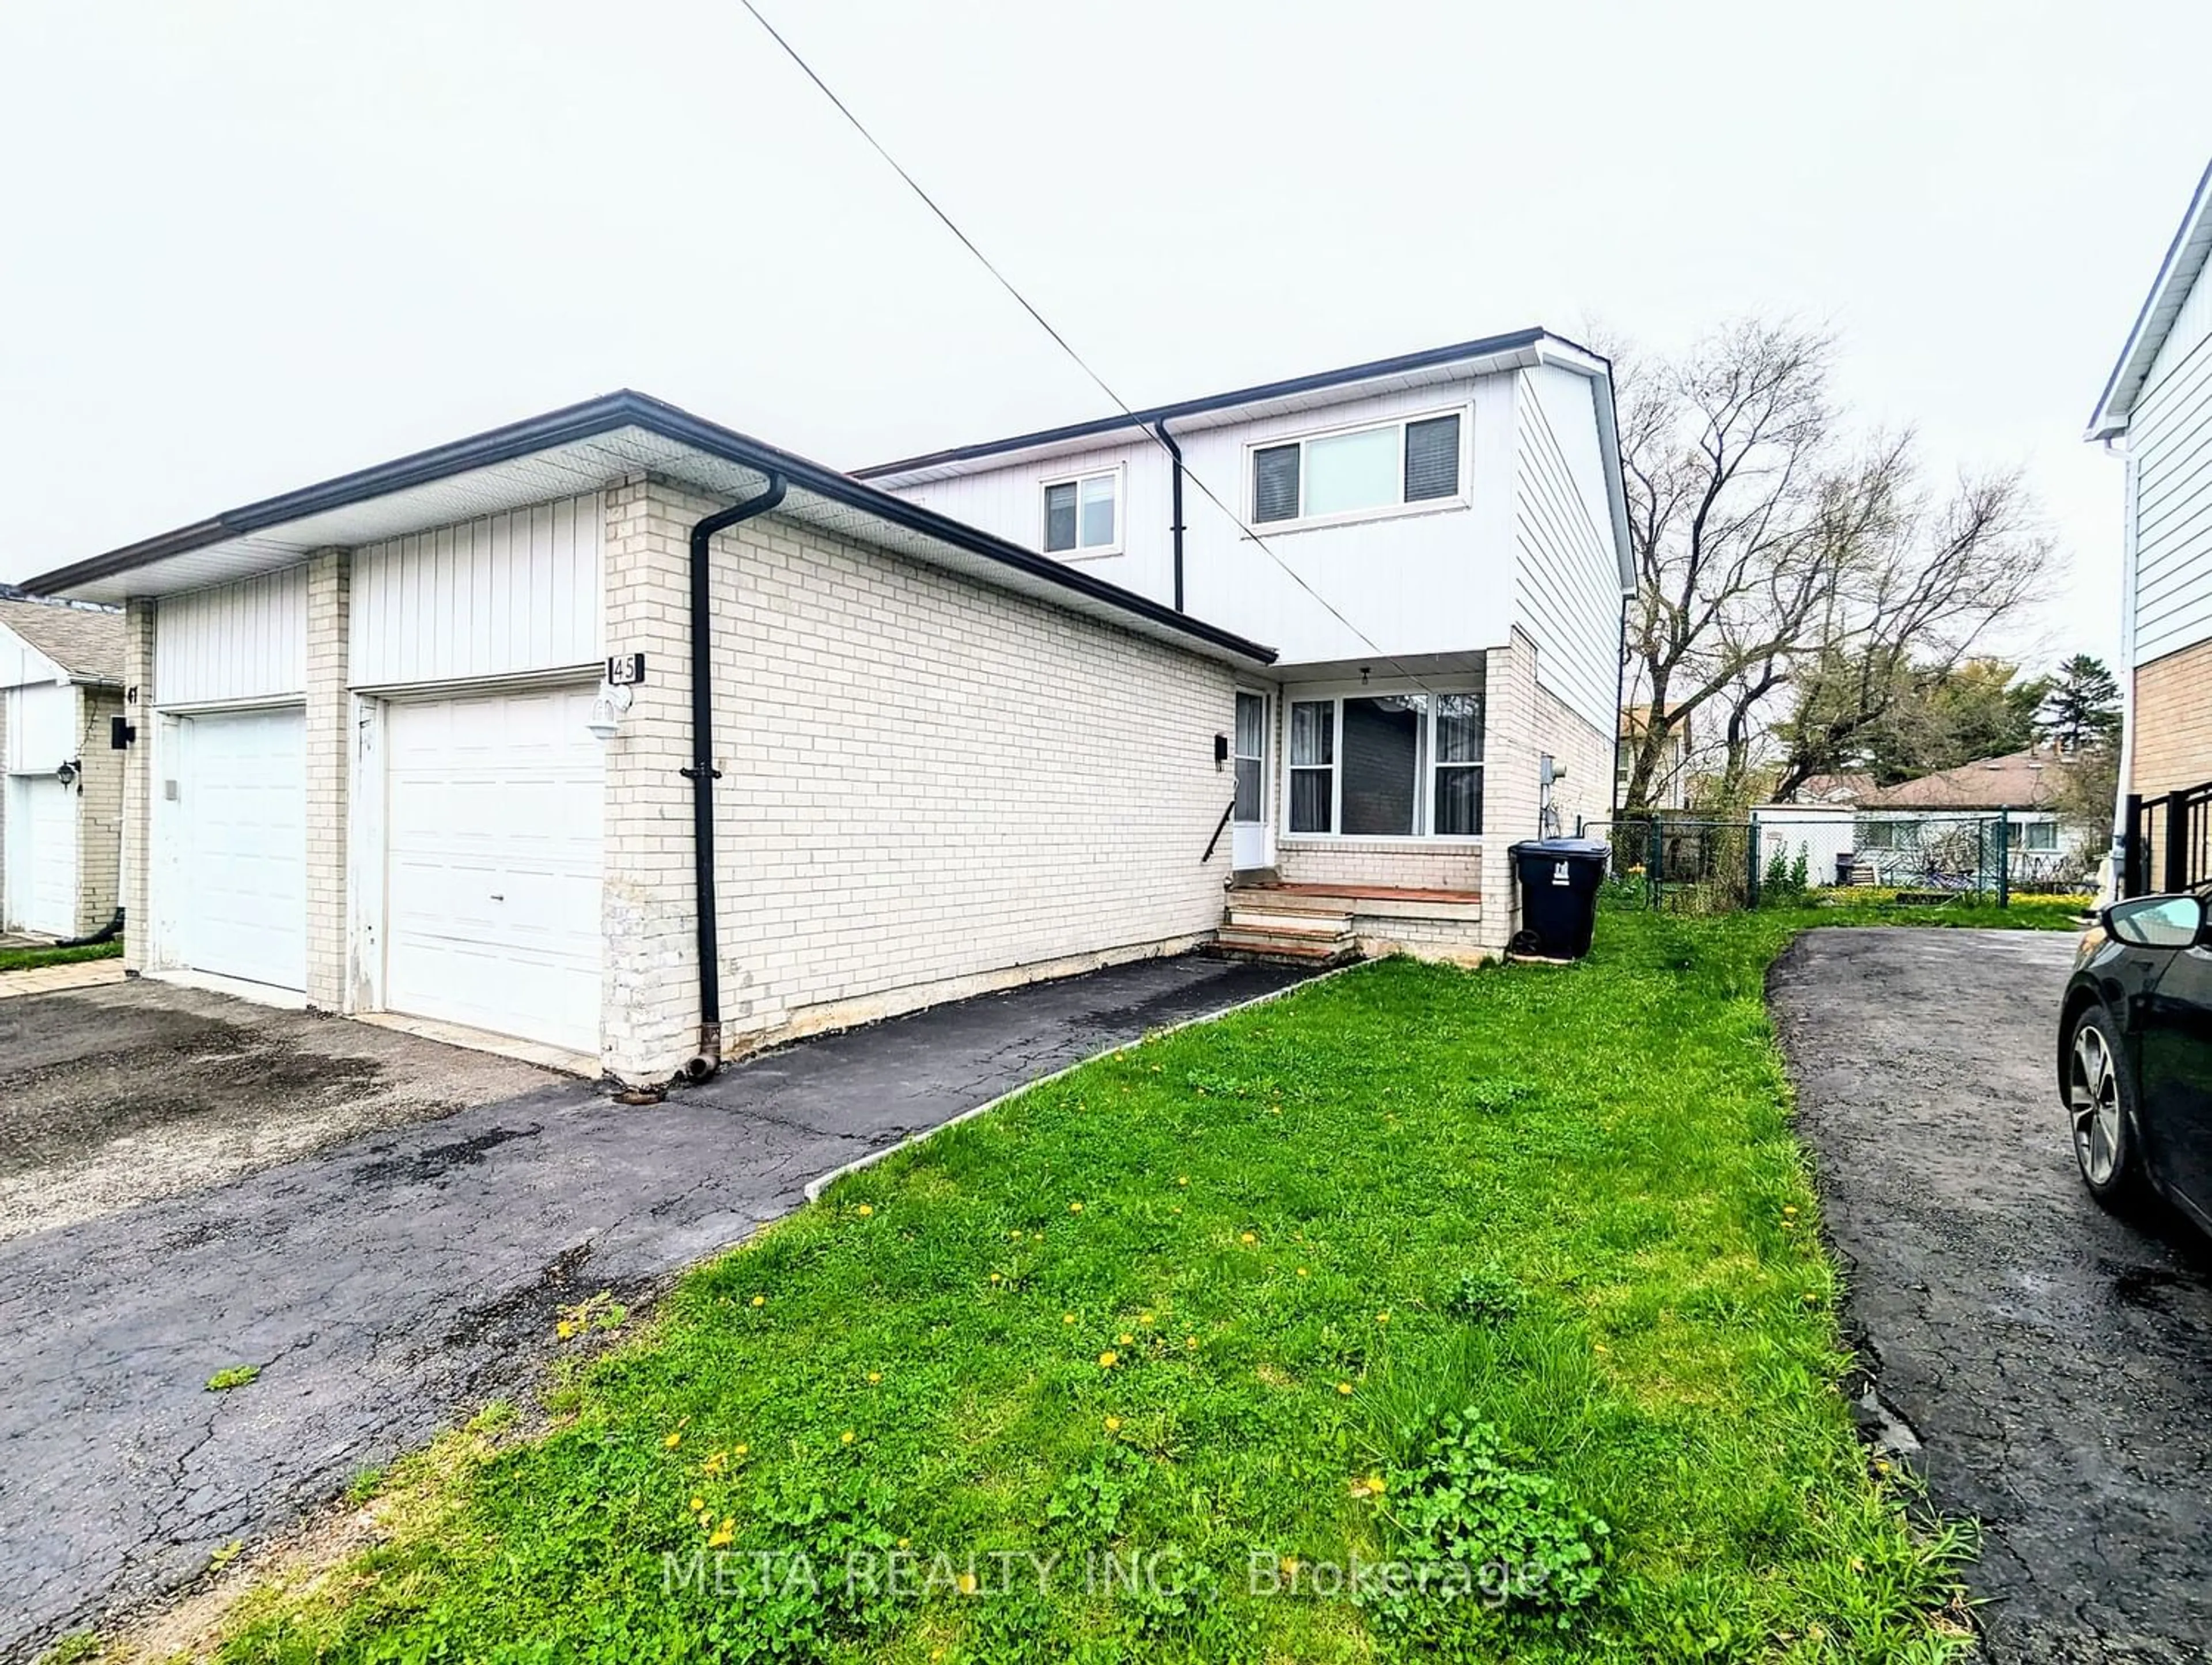 Frontside or backside of a home for 45 Whiteleas Ave, Toronto Ontario M1B 1W8